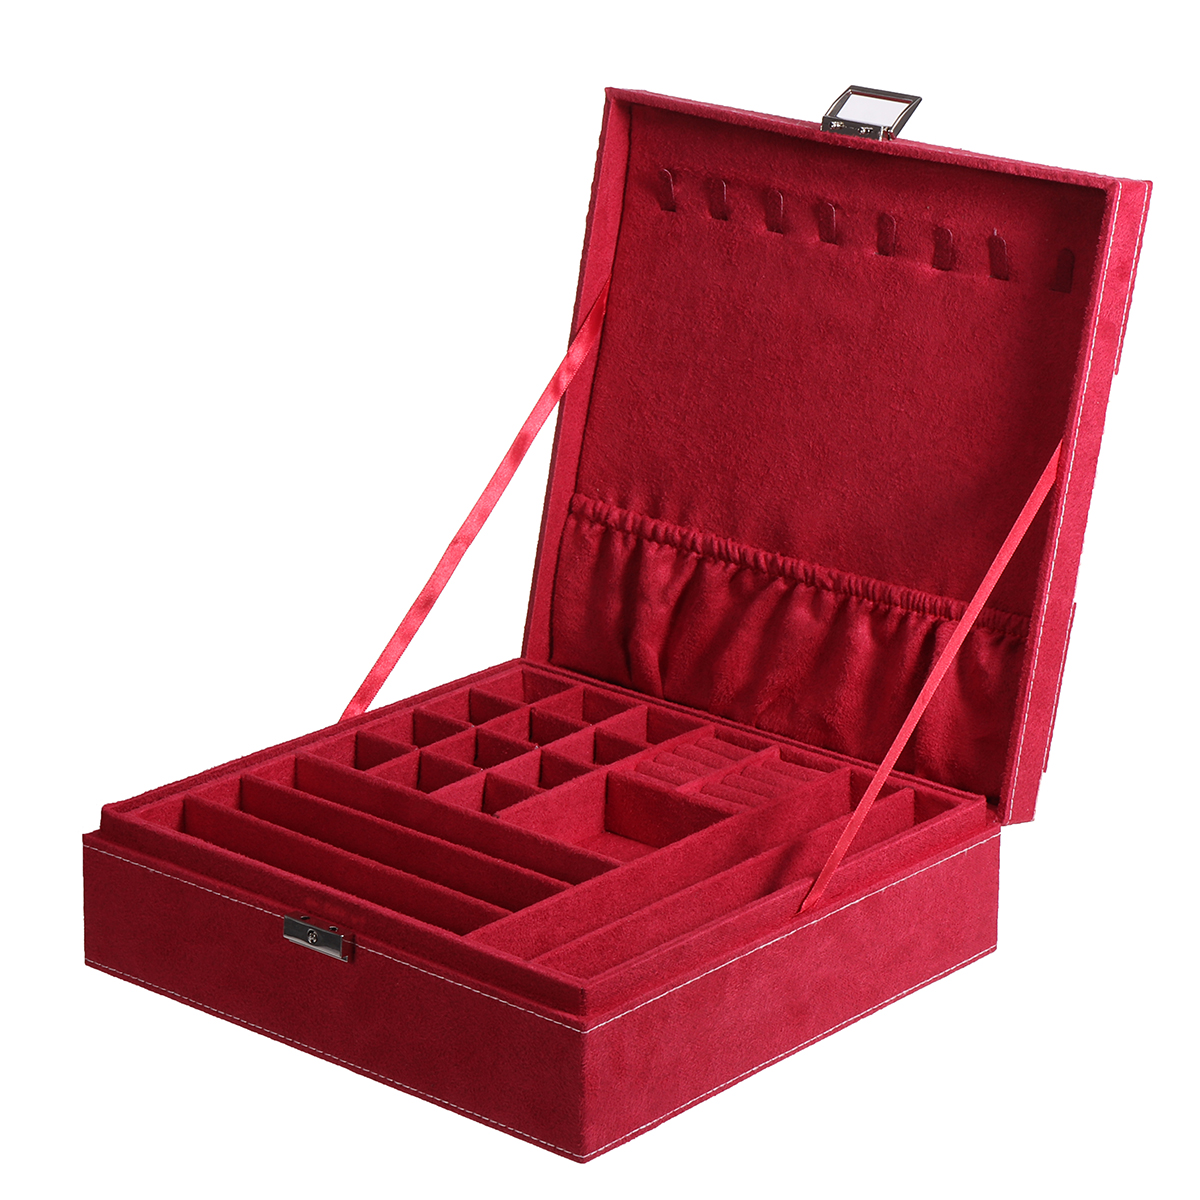 Multi-function-Vintage-Jewelry-Box-Organizers-Two-layer-Lockable-Jewelry-Display-Storage-Case-1855370-29